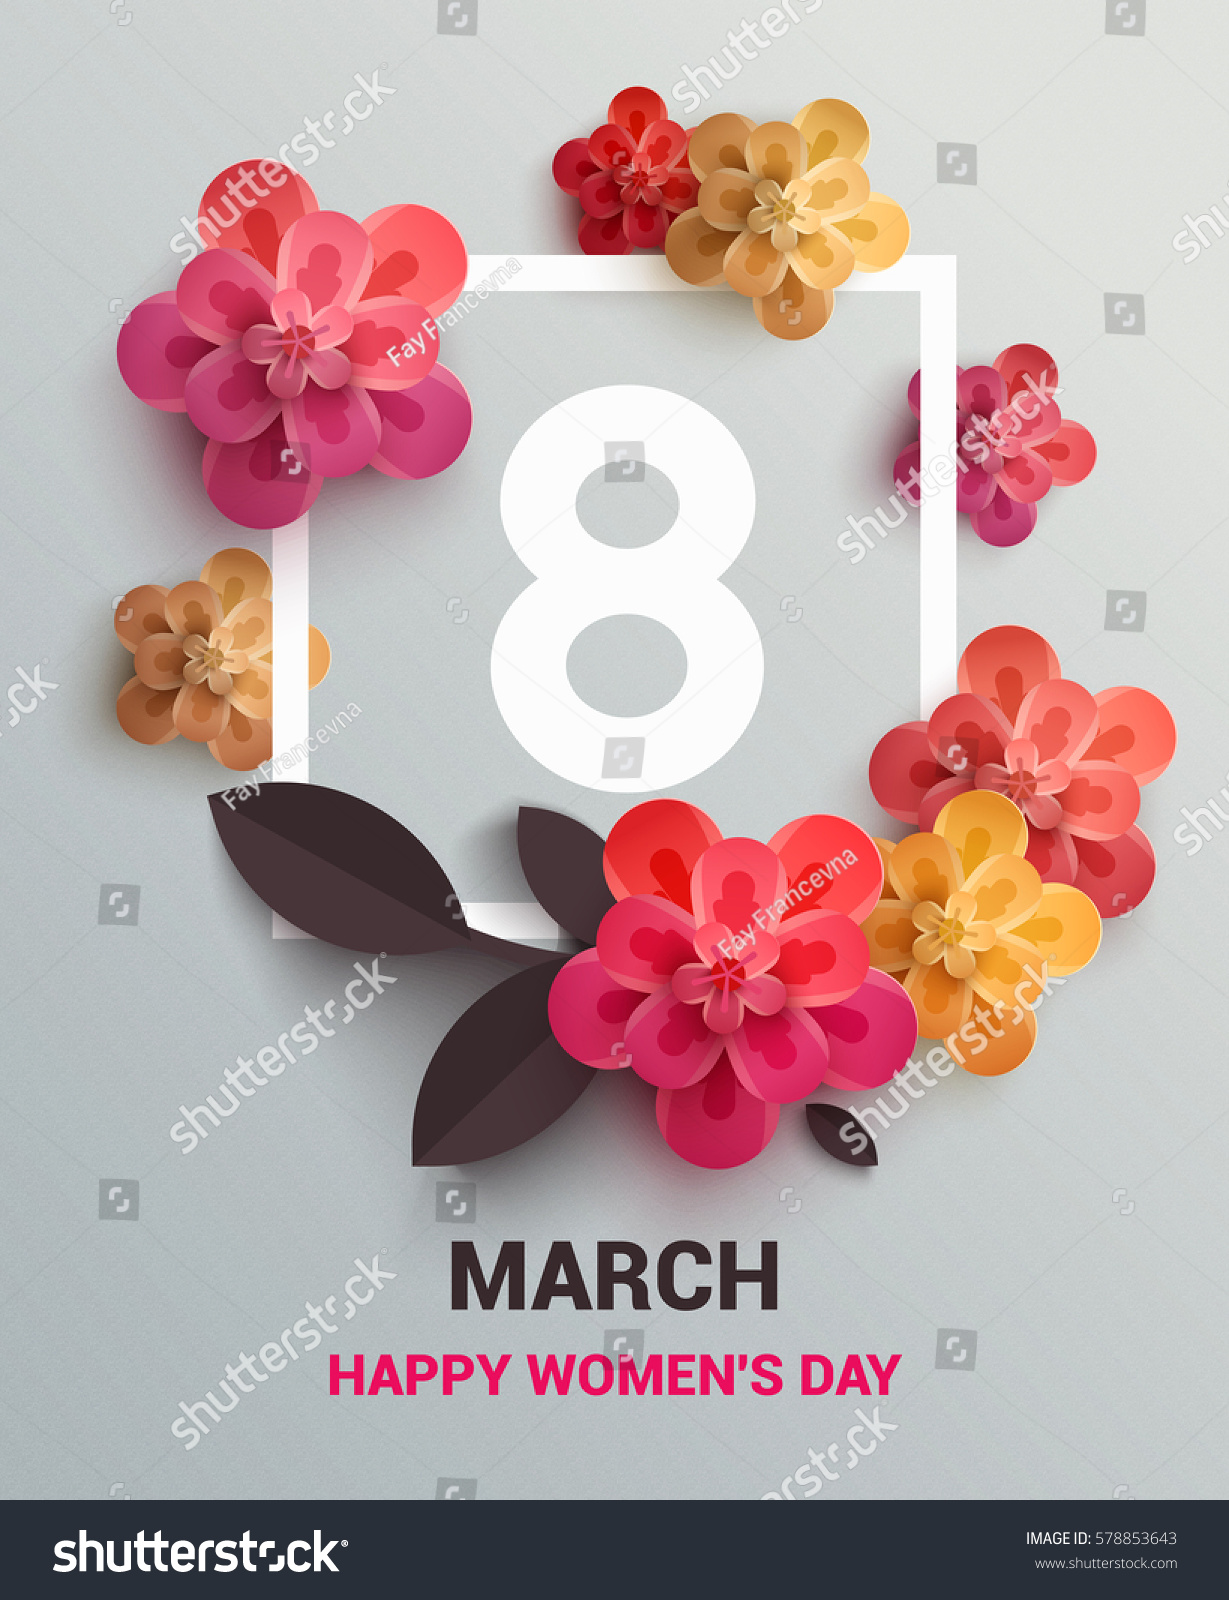 Postcard to March 8, with paper flowers. Illustration can be used in the newsletter, brochures, postcards, tickets, advertisements, banners. Congratulations to the Women's Day. #578853643